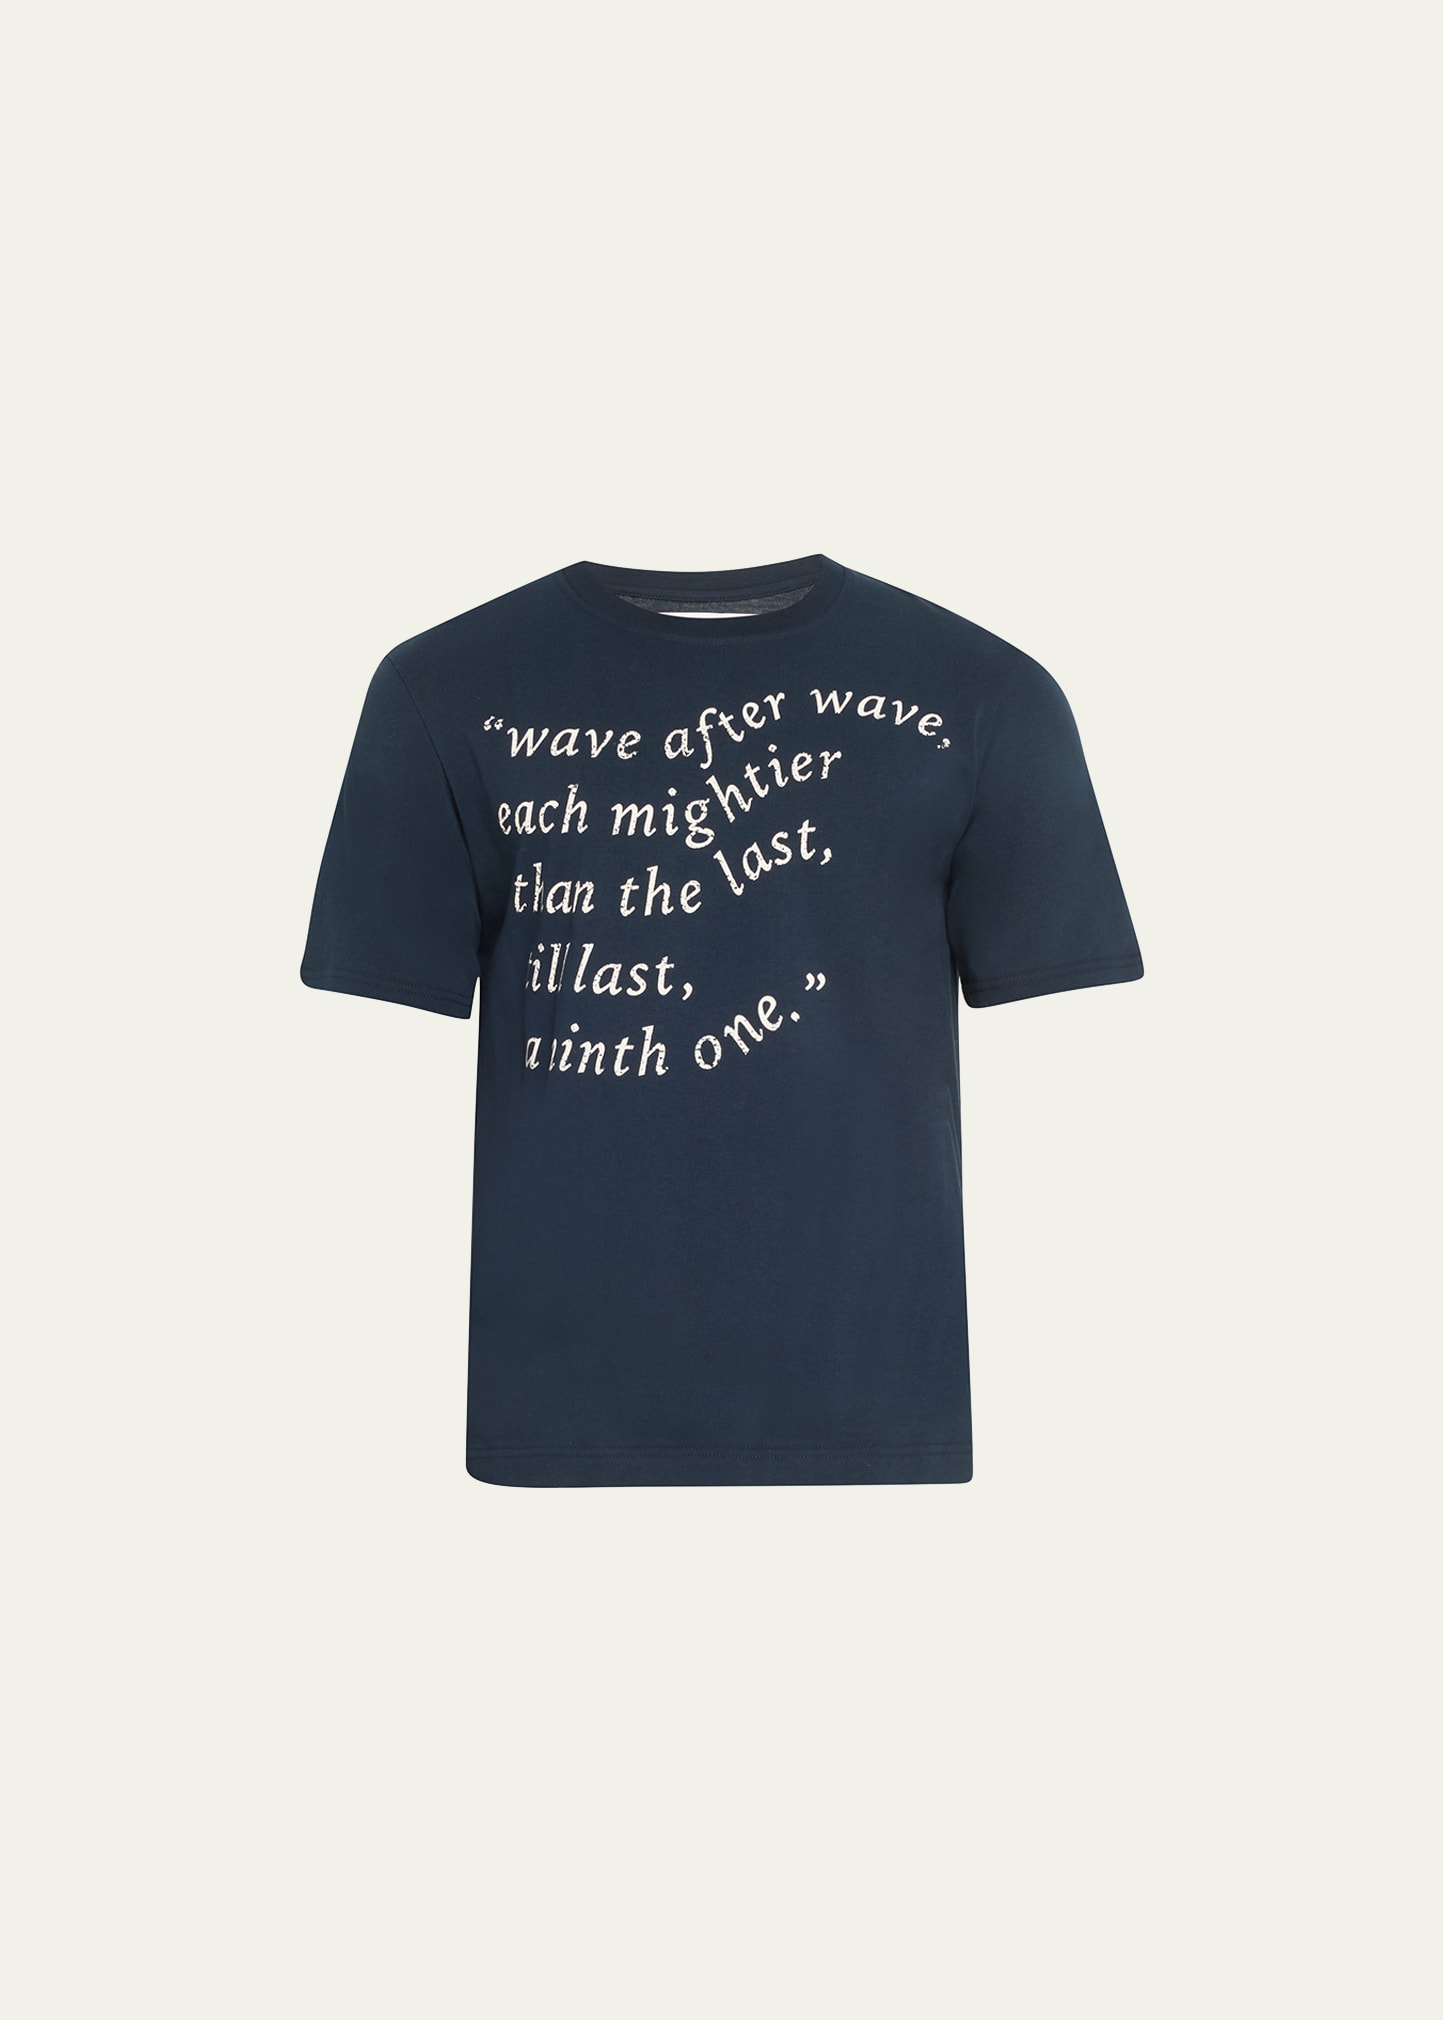 S.S. DALEY Men's Jersey Waves Quote T-Shirt